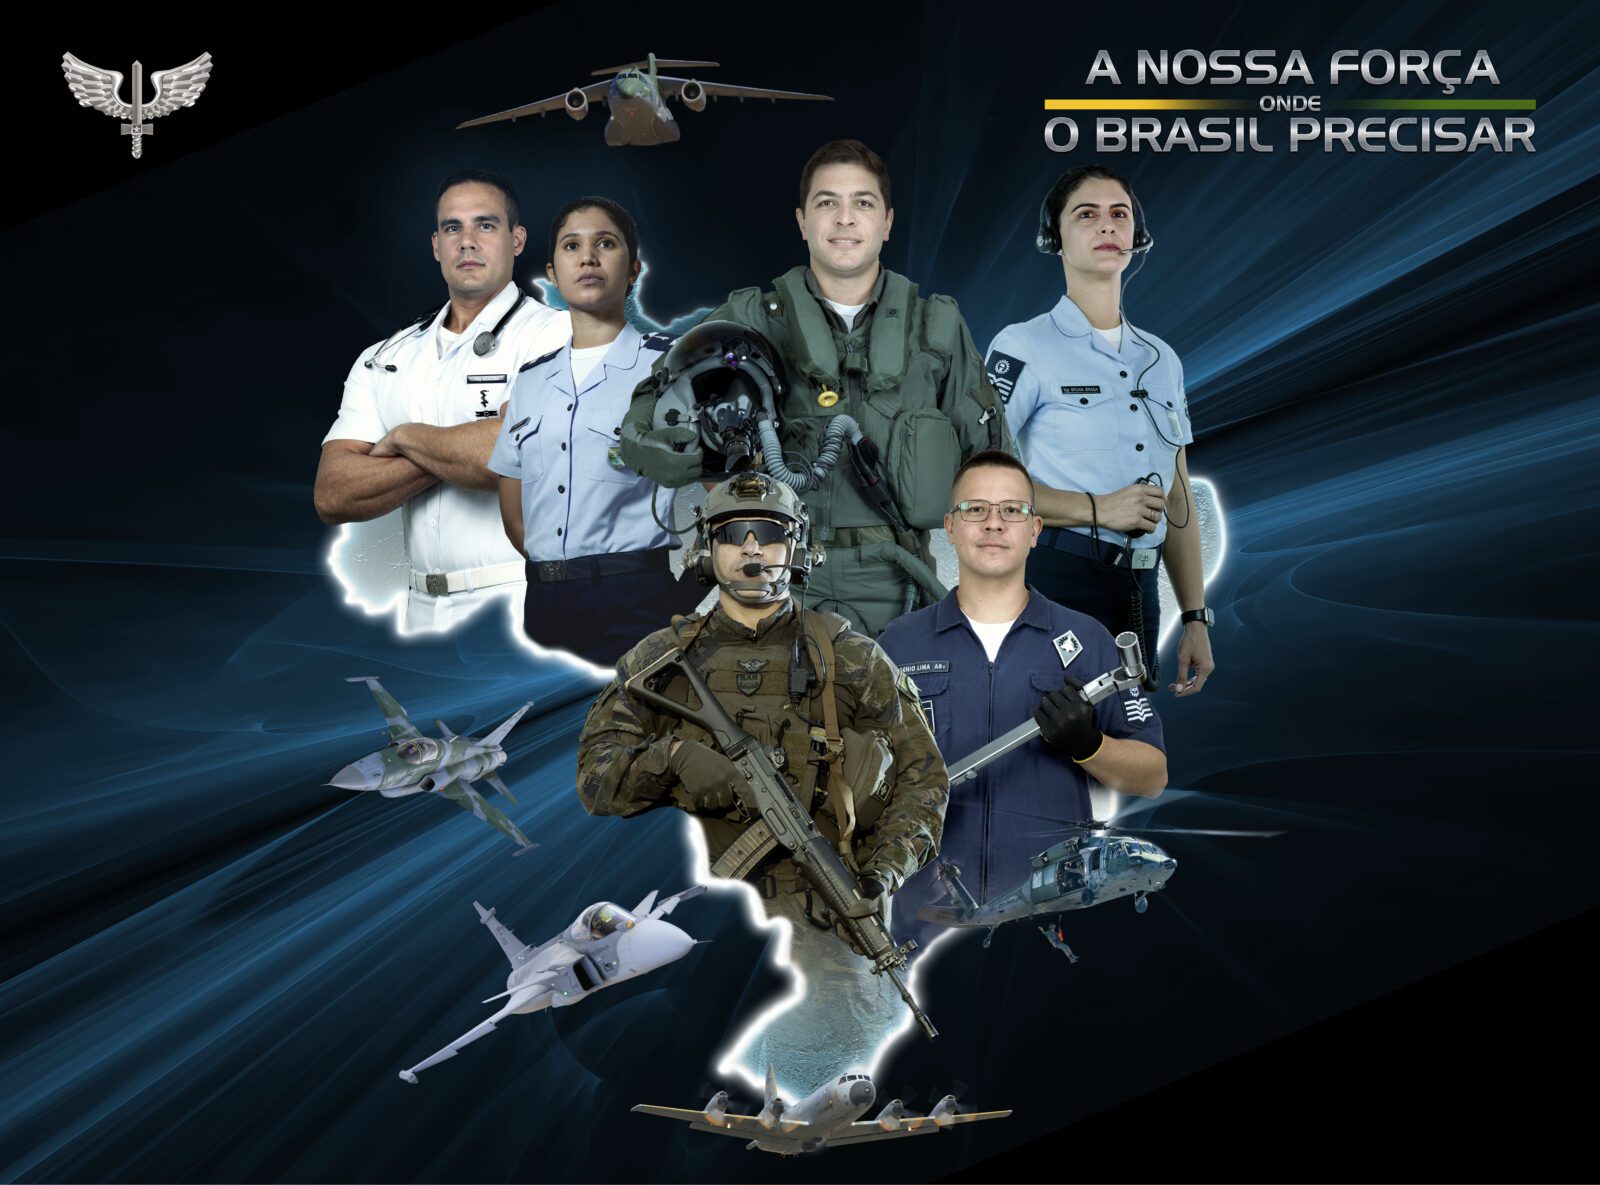 FAB launches institutional campaign: "Our Force wherever Brazil needs it"